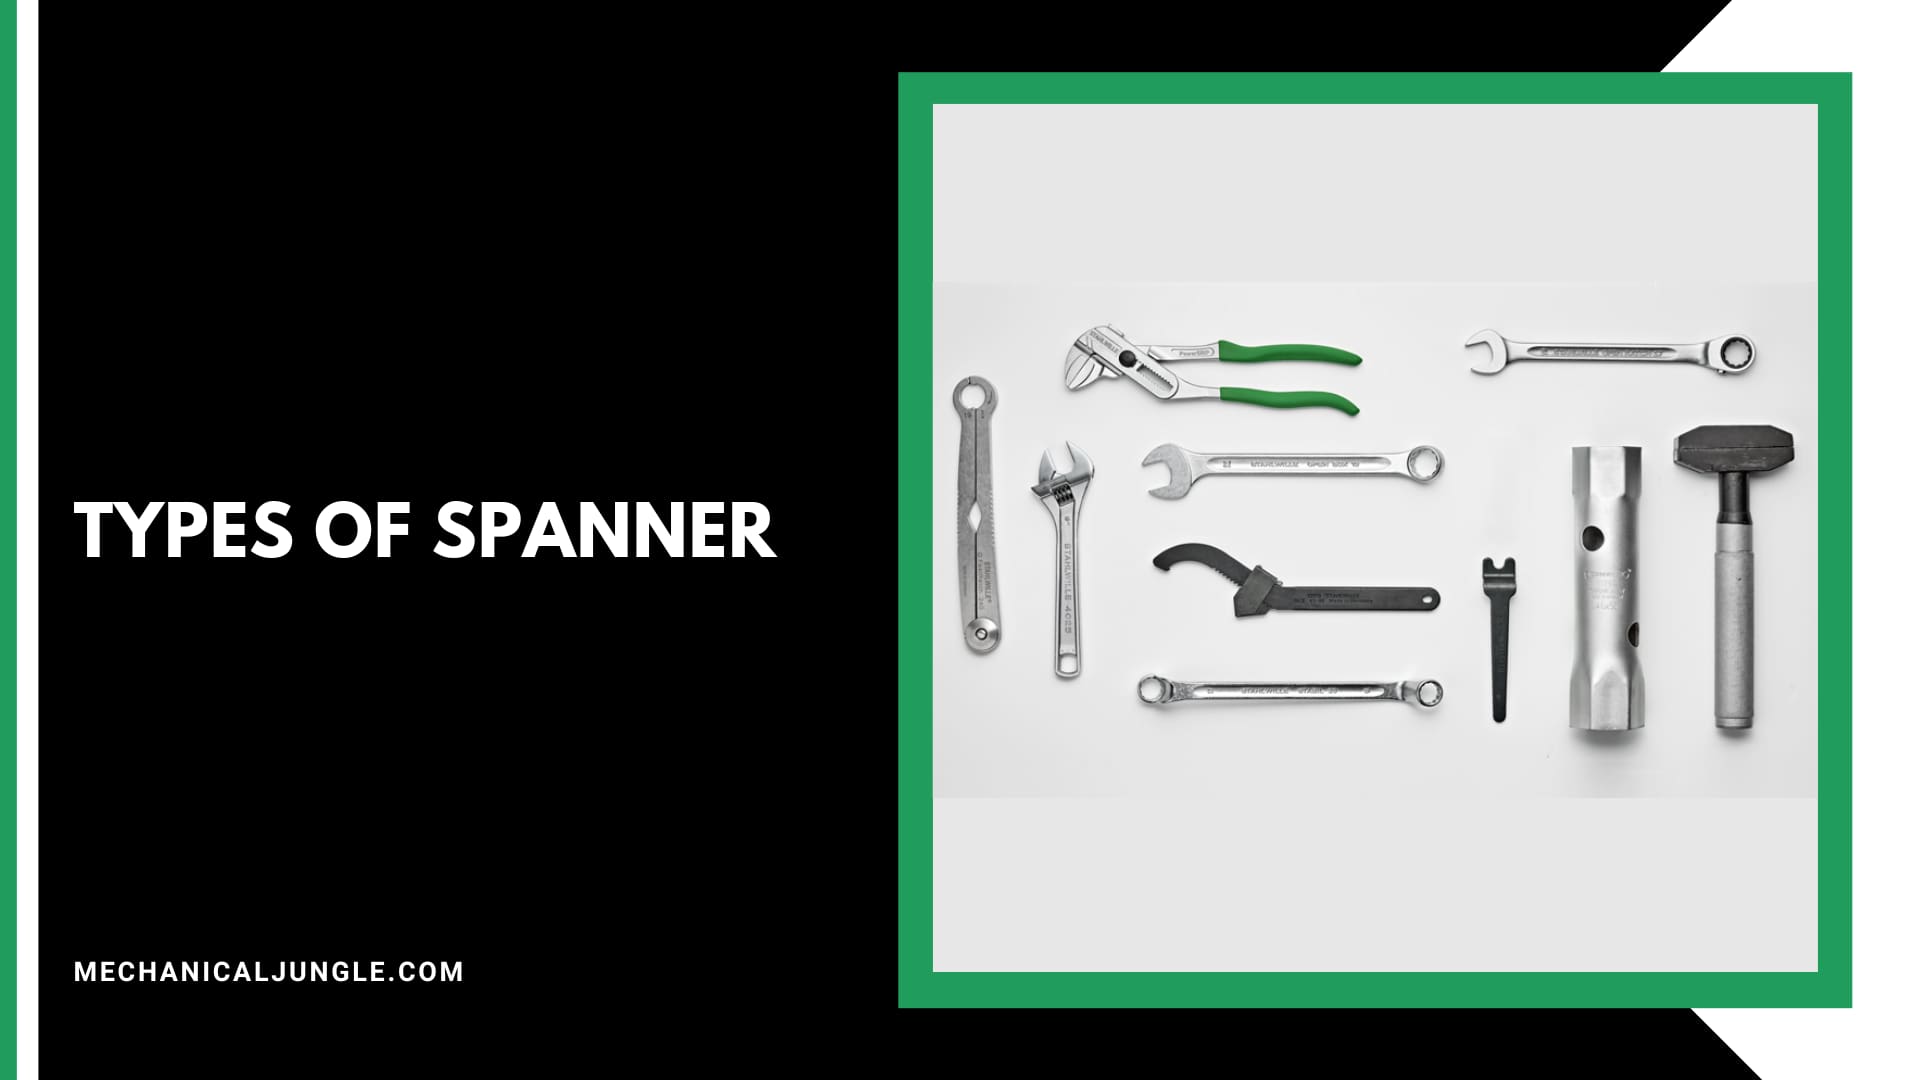 Types of Spanner